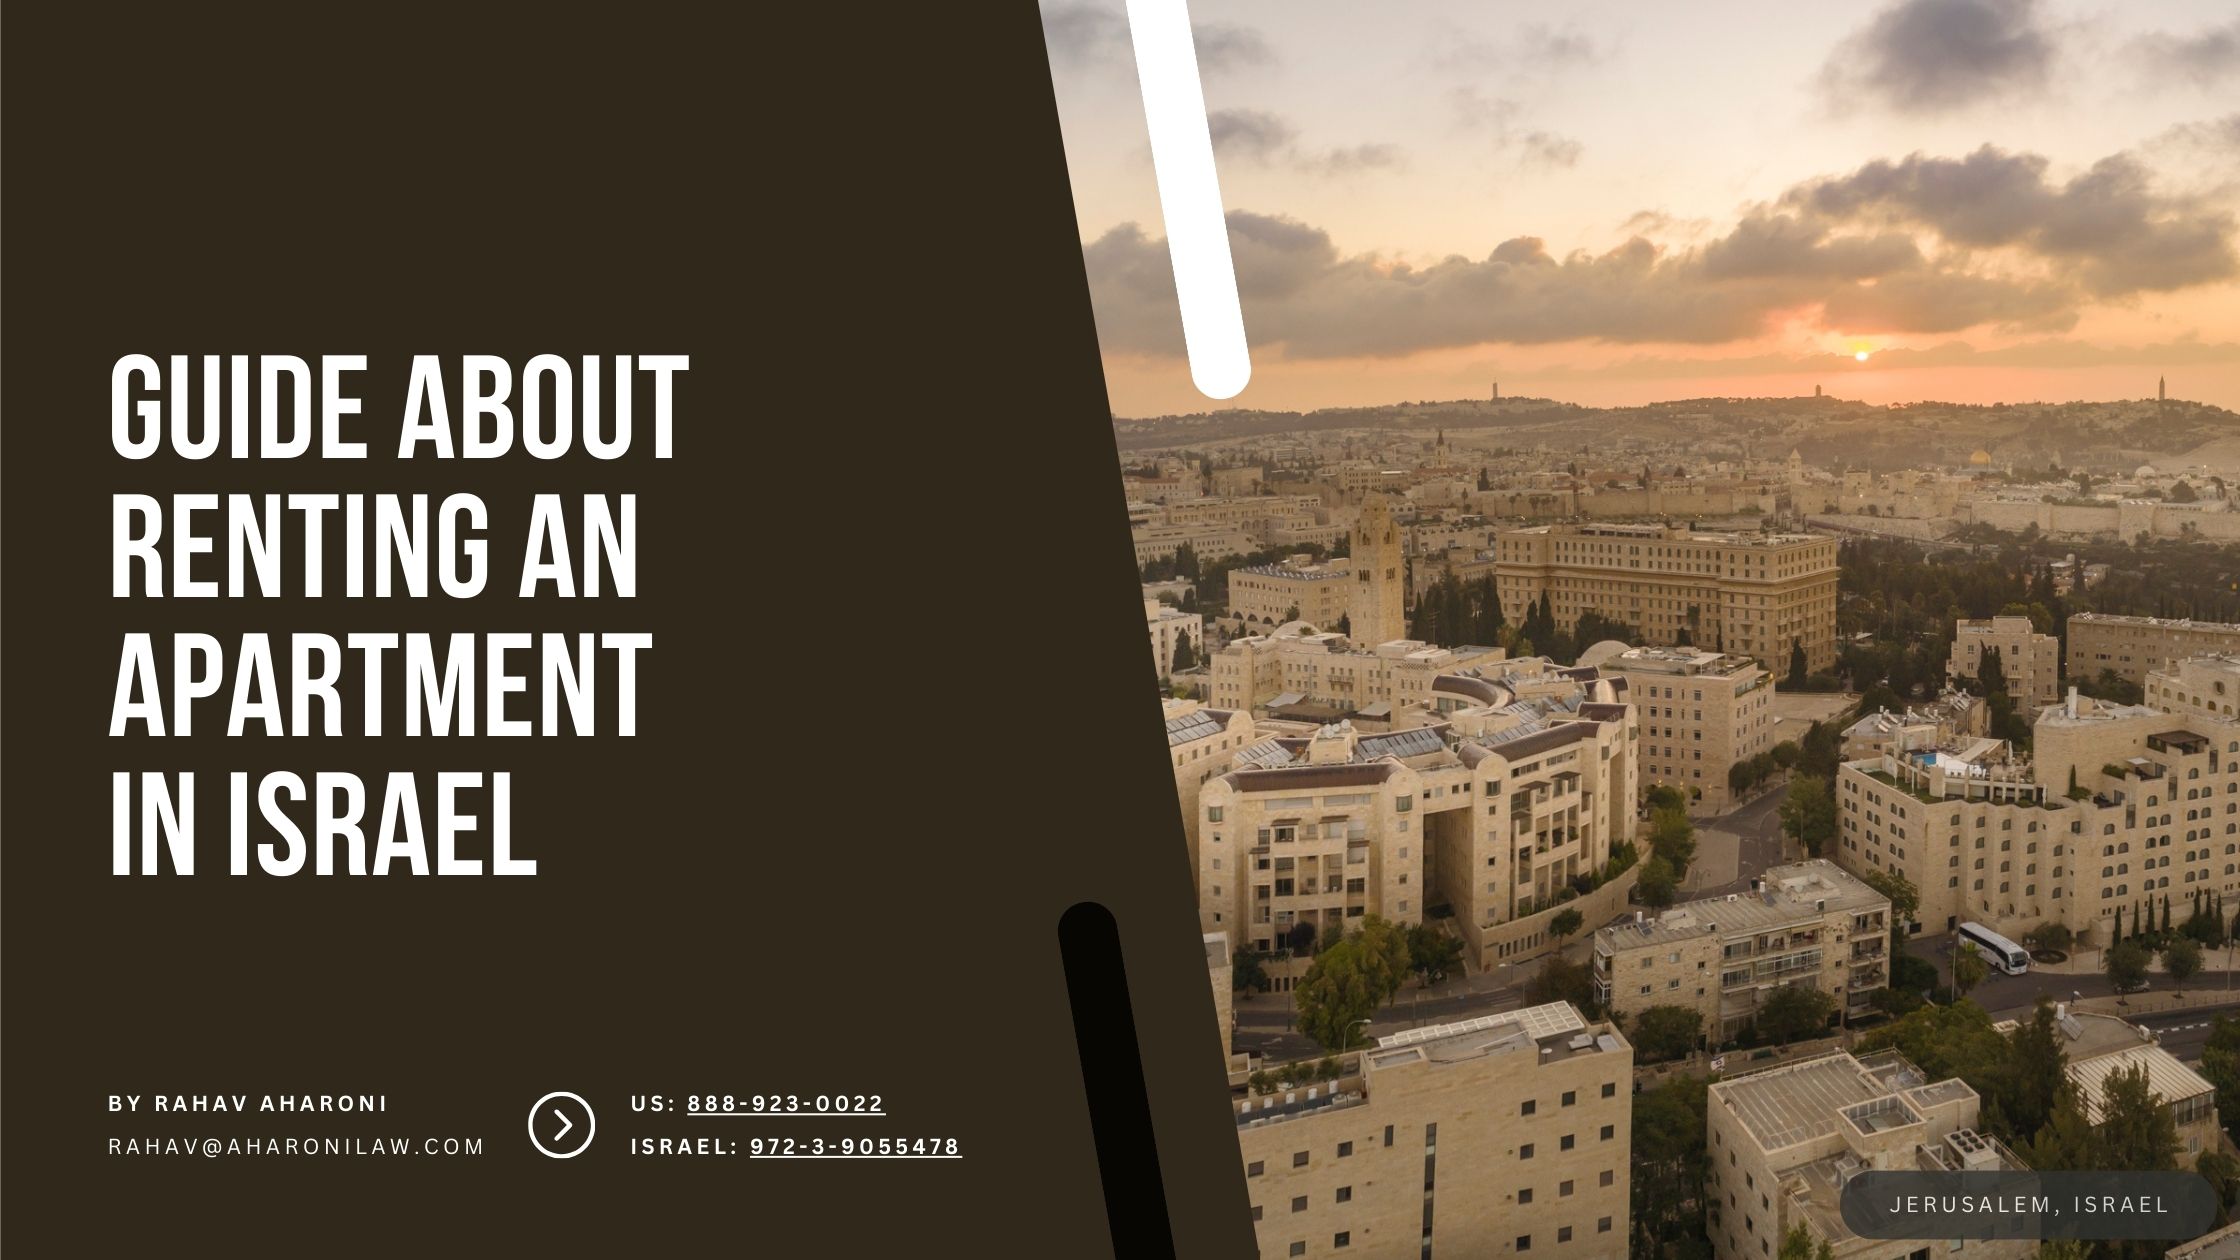 Israeli Guide About Renting an Apartment in Israel